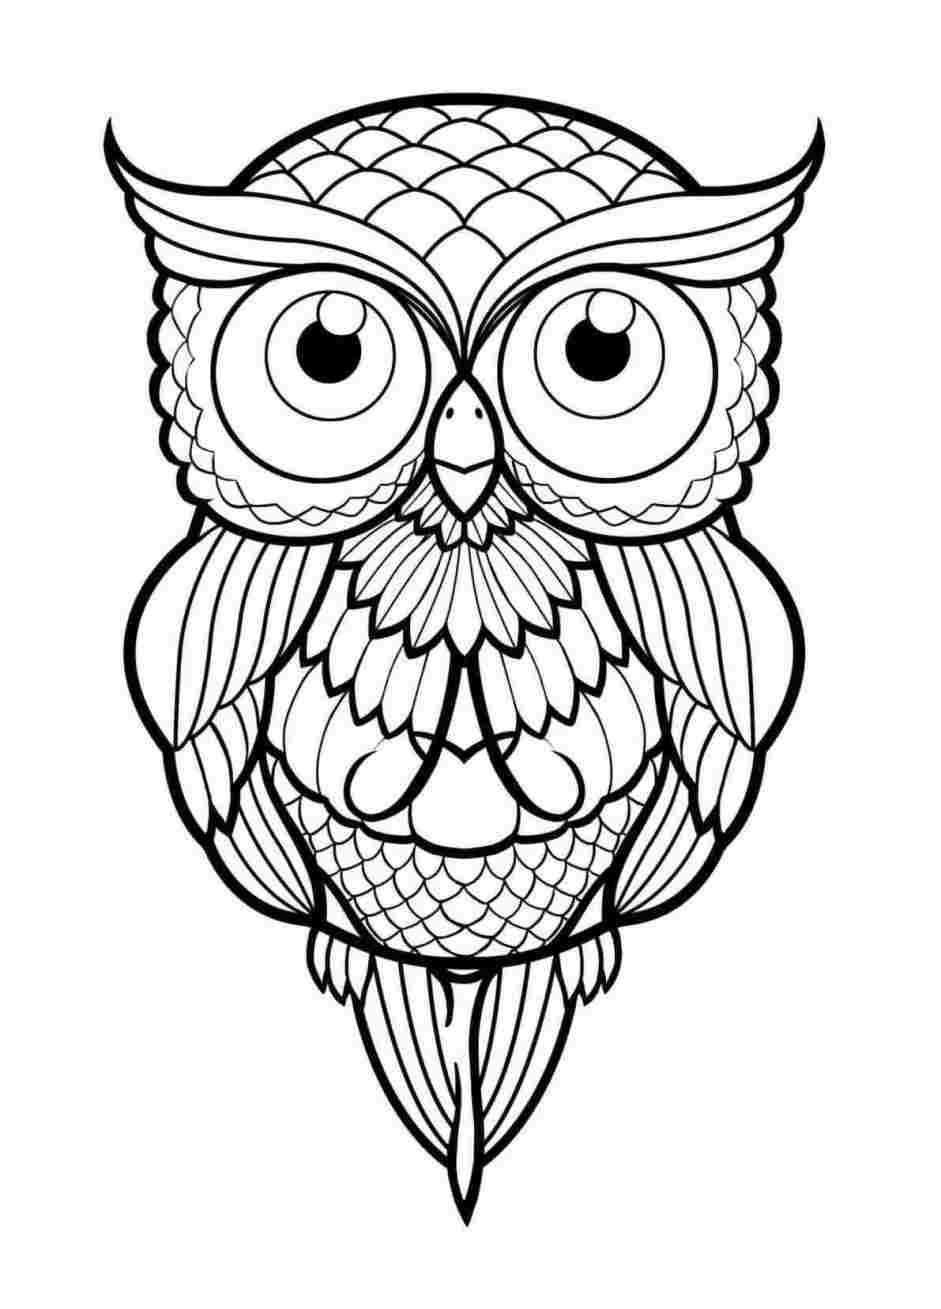 Simple Cute Owl Drawing | Free download on ClipArtMag